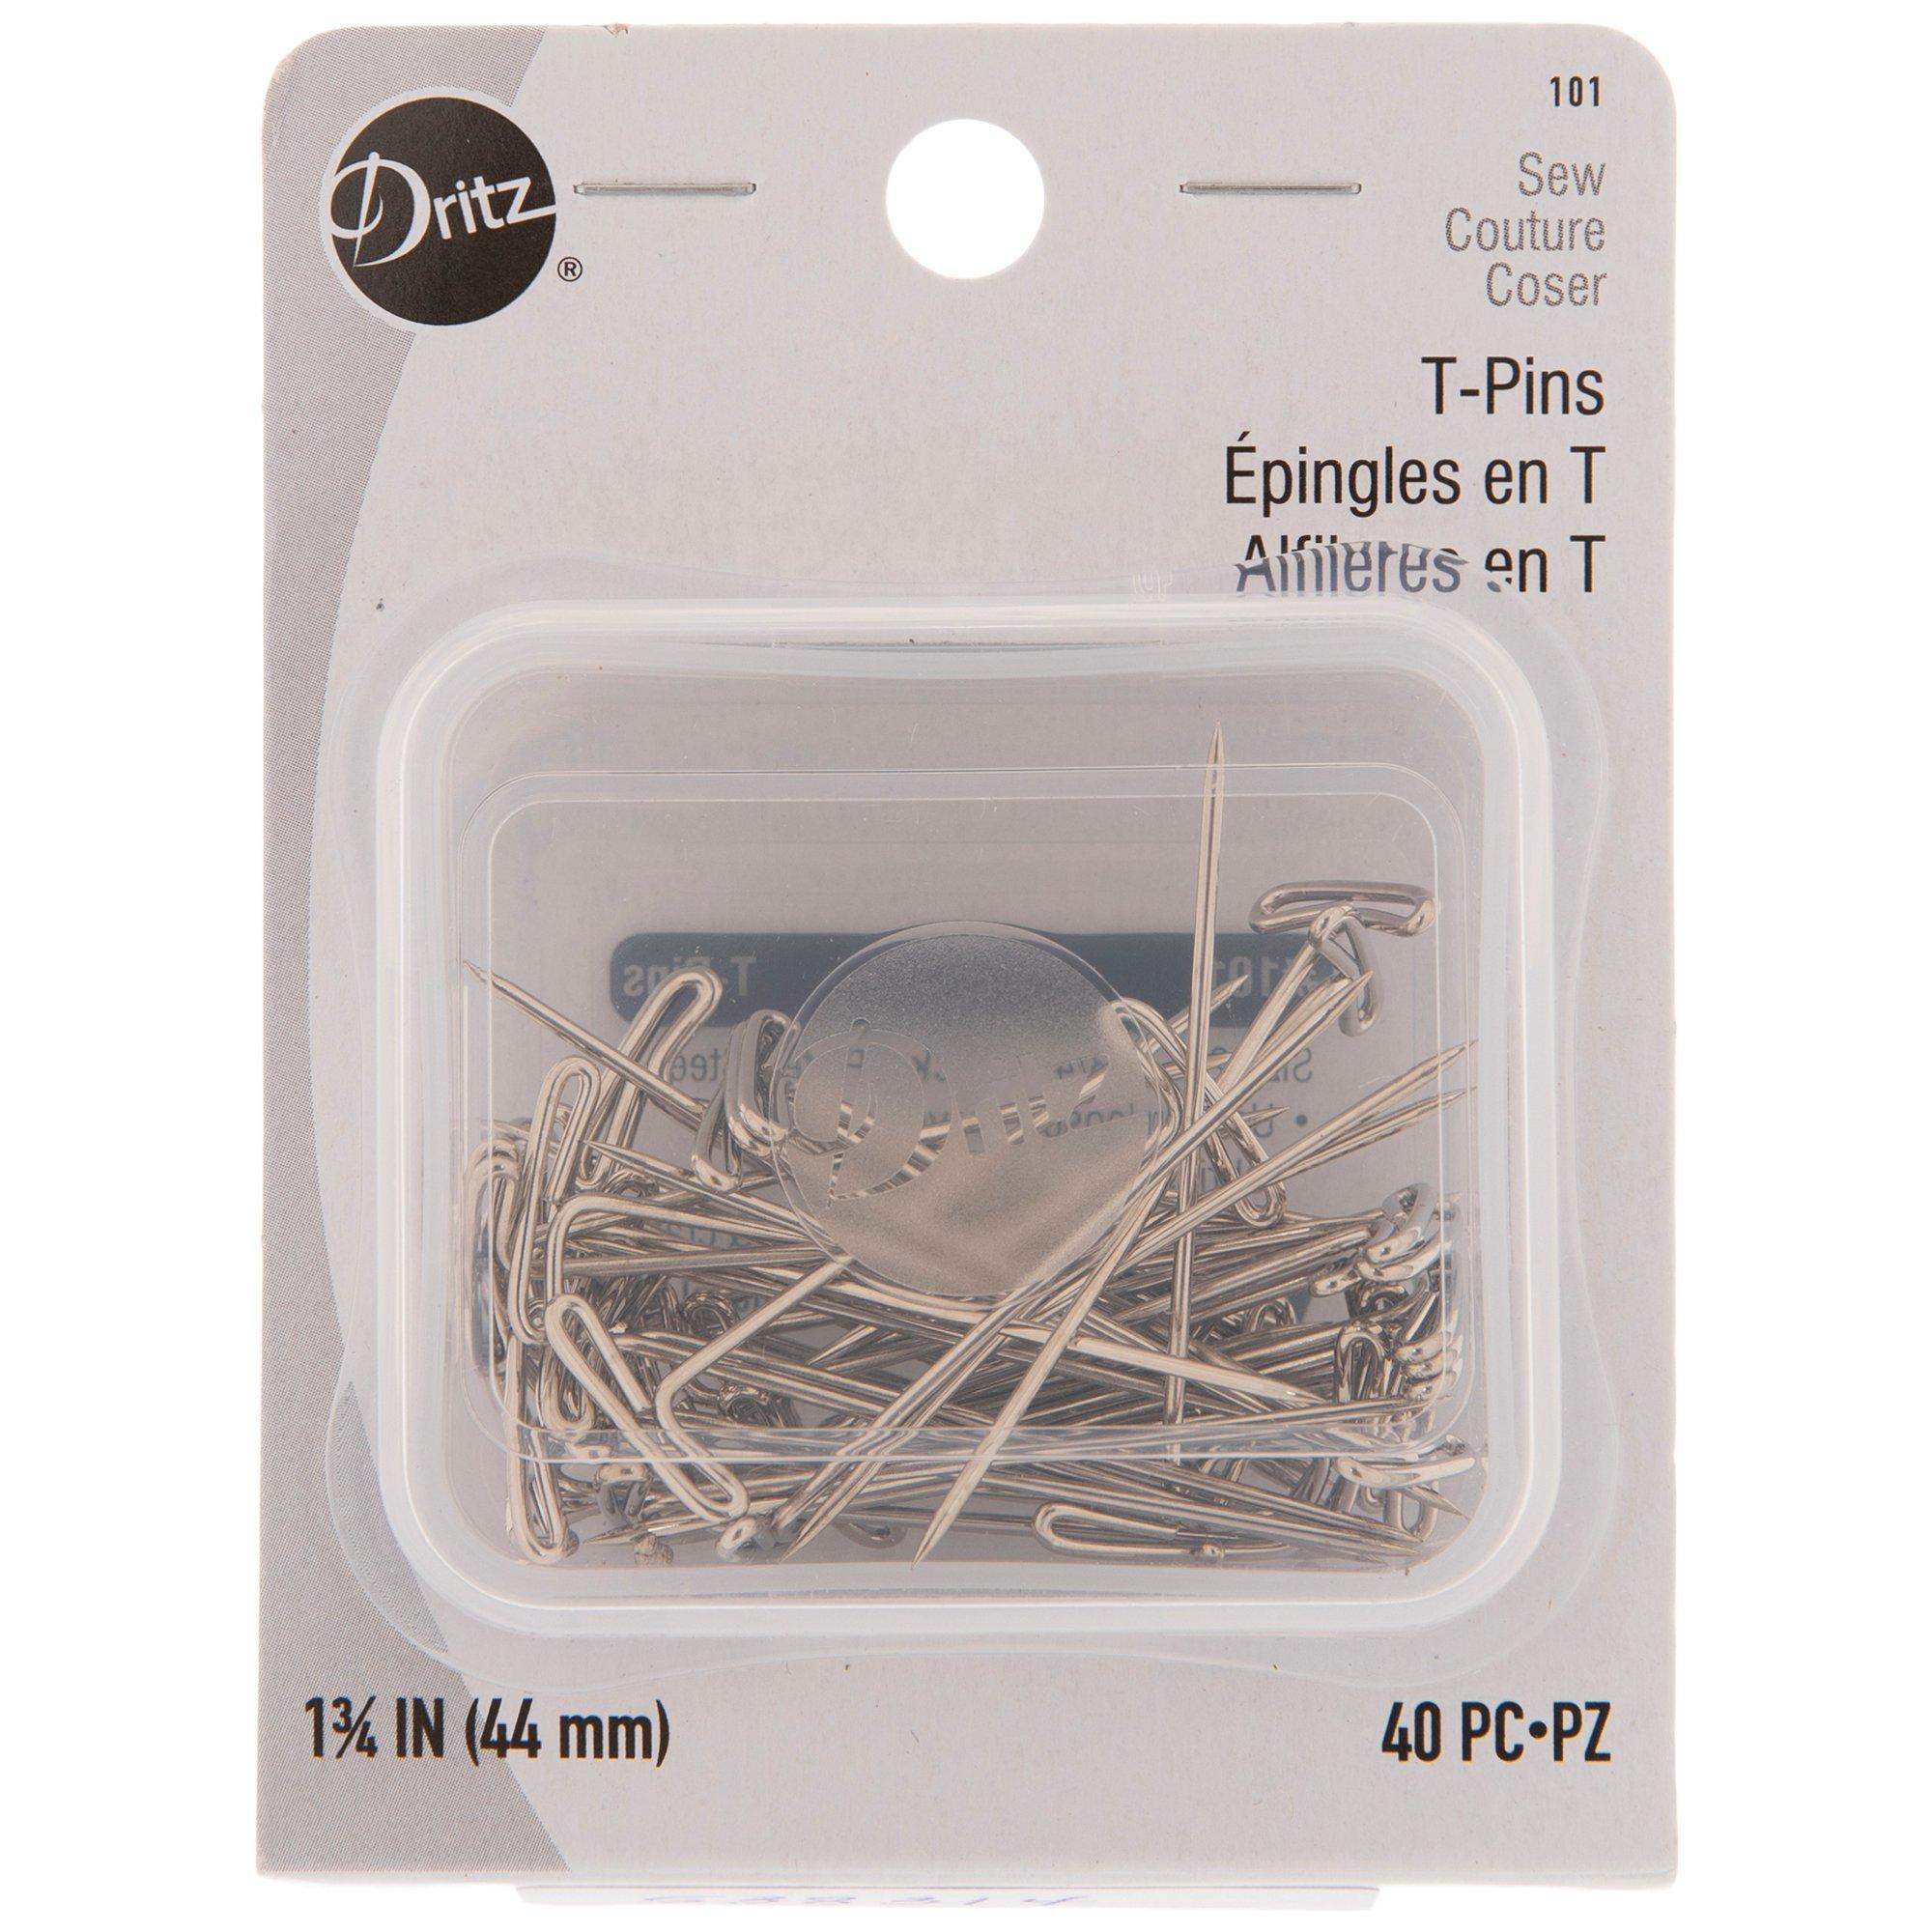 150pcs Steel T-pins Assorted Two Sizes Nickel Plated Sewing Pins